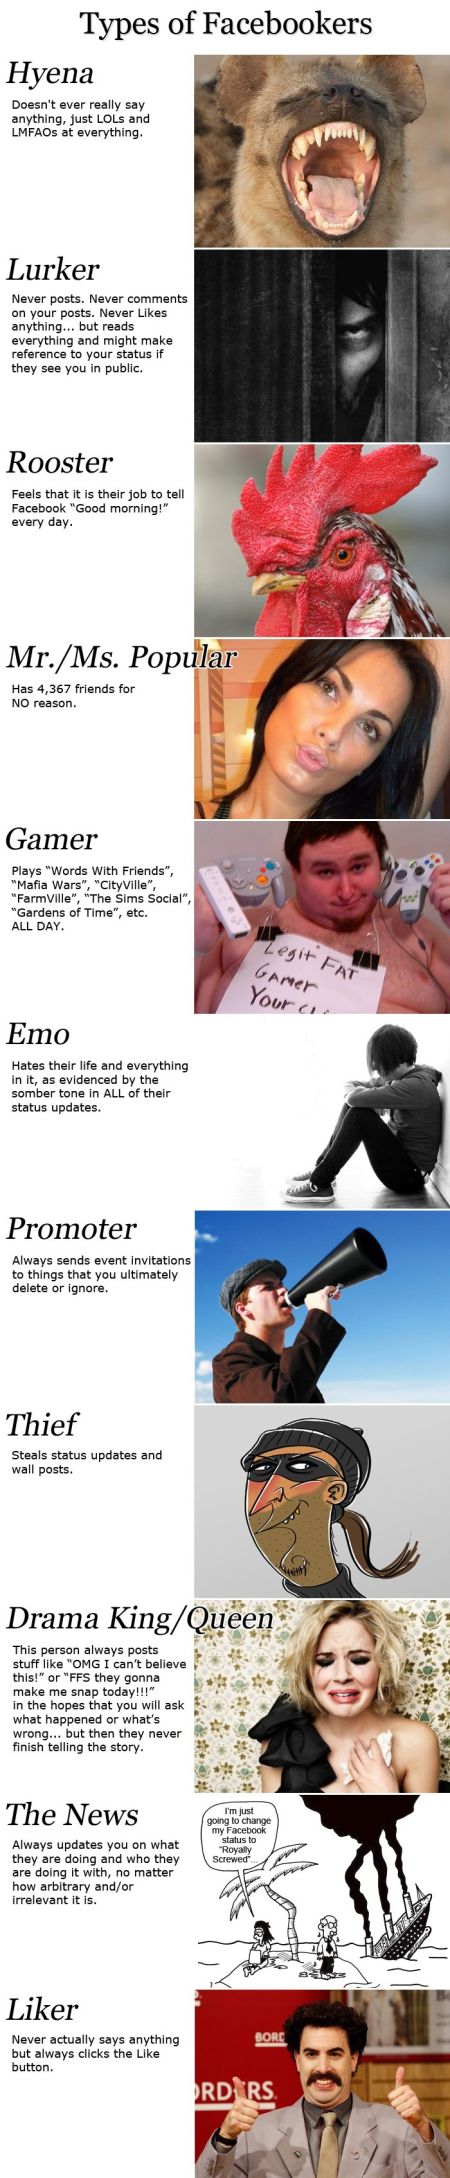 types of facebookers